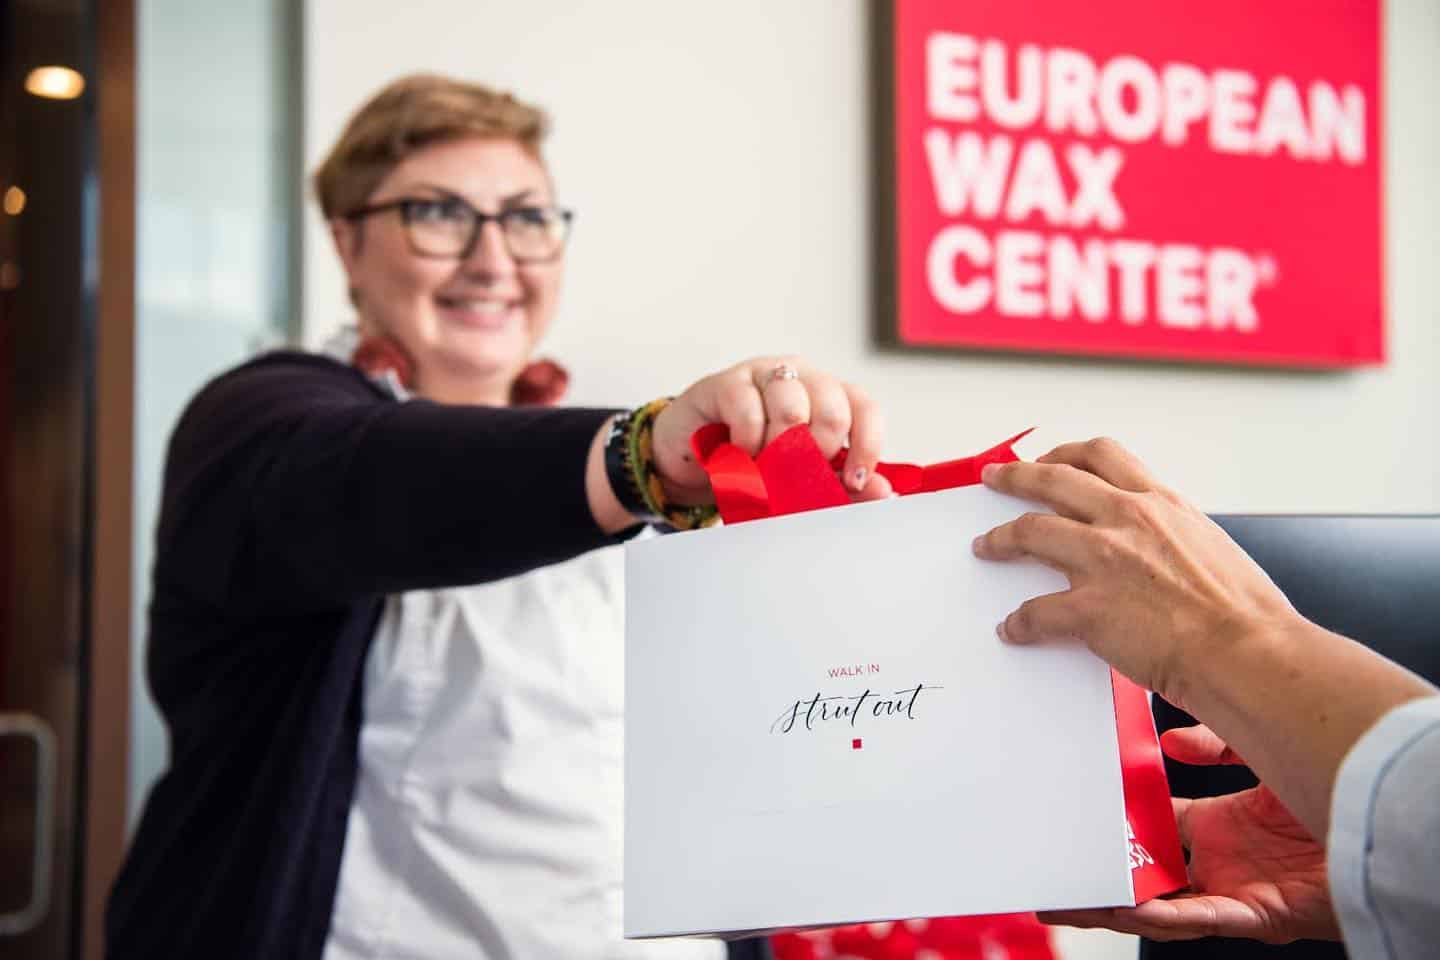 European Wax Center is getting ready to open its doors and we couldn’t be more excited! 

If you’re a first time guest, your first wax is complimentary. You can choose between brows, nose, underarms, bikini line, ears or upper, middle or lower back. 

Visit the link in our bio to stay up to date on official opening information and exclusive offers!